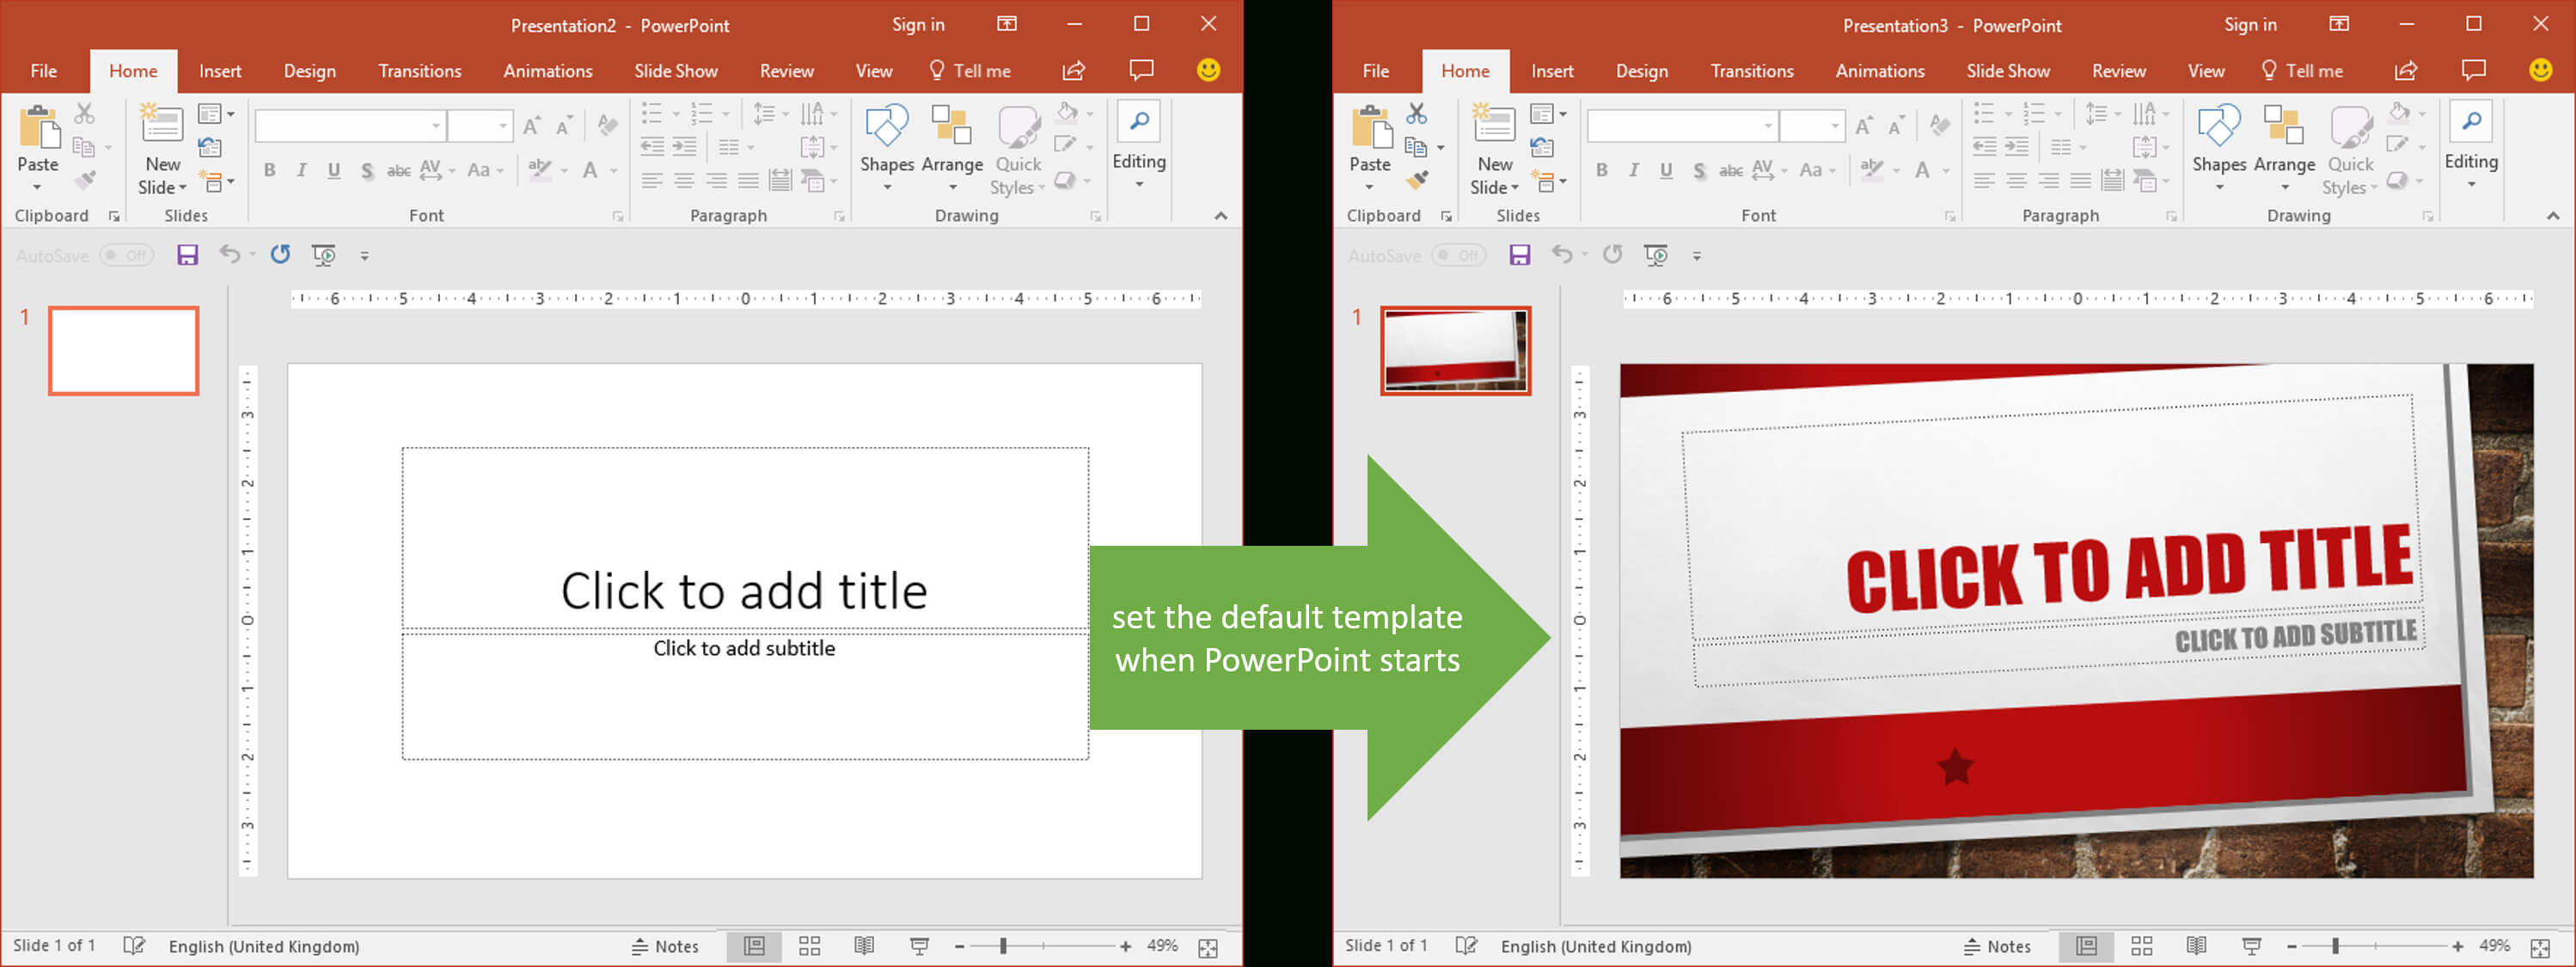 Set The Default Template When Powerpoint Starts | Youpresent For Where Are Powerpoint Templates Stored